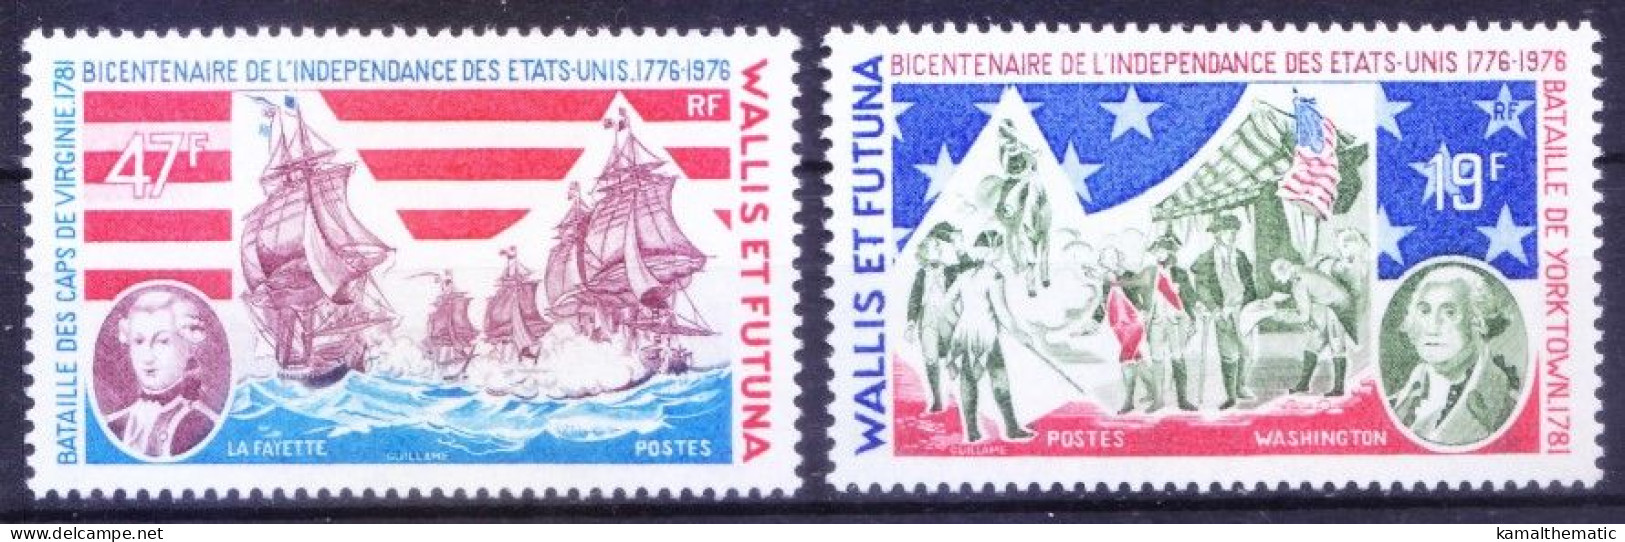 Wallis And Futuna 196 MNH 2v, Bicentenary Of Independence Of United States - Independecia USA